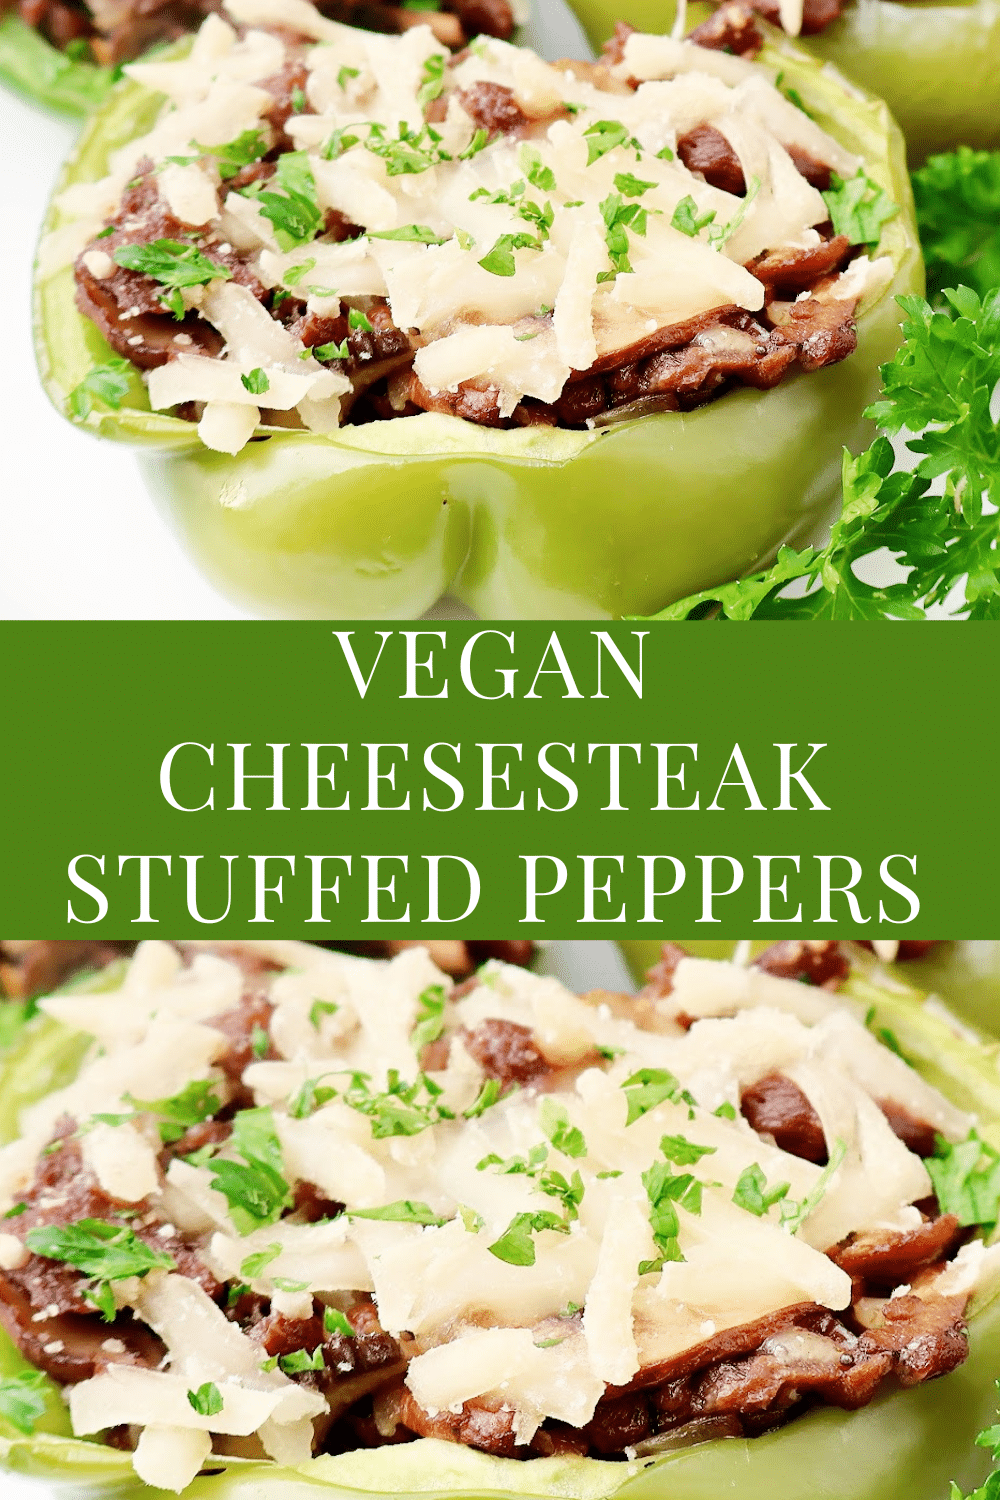 Vegan Cheesesteak Stuffed Peppers ~ Thin sliced vegan steak, sautéed mushrooms and onions, and melted cheese stuffed inside crisp green peppers and roasted to perfection. via @thiswifecooks